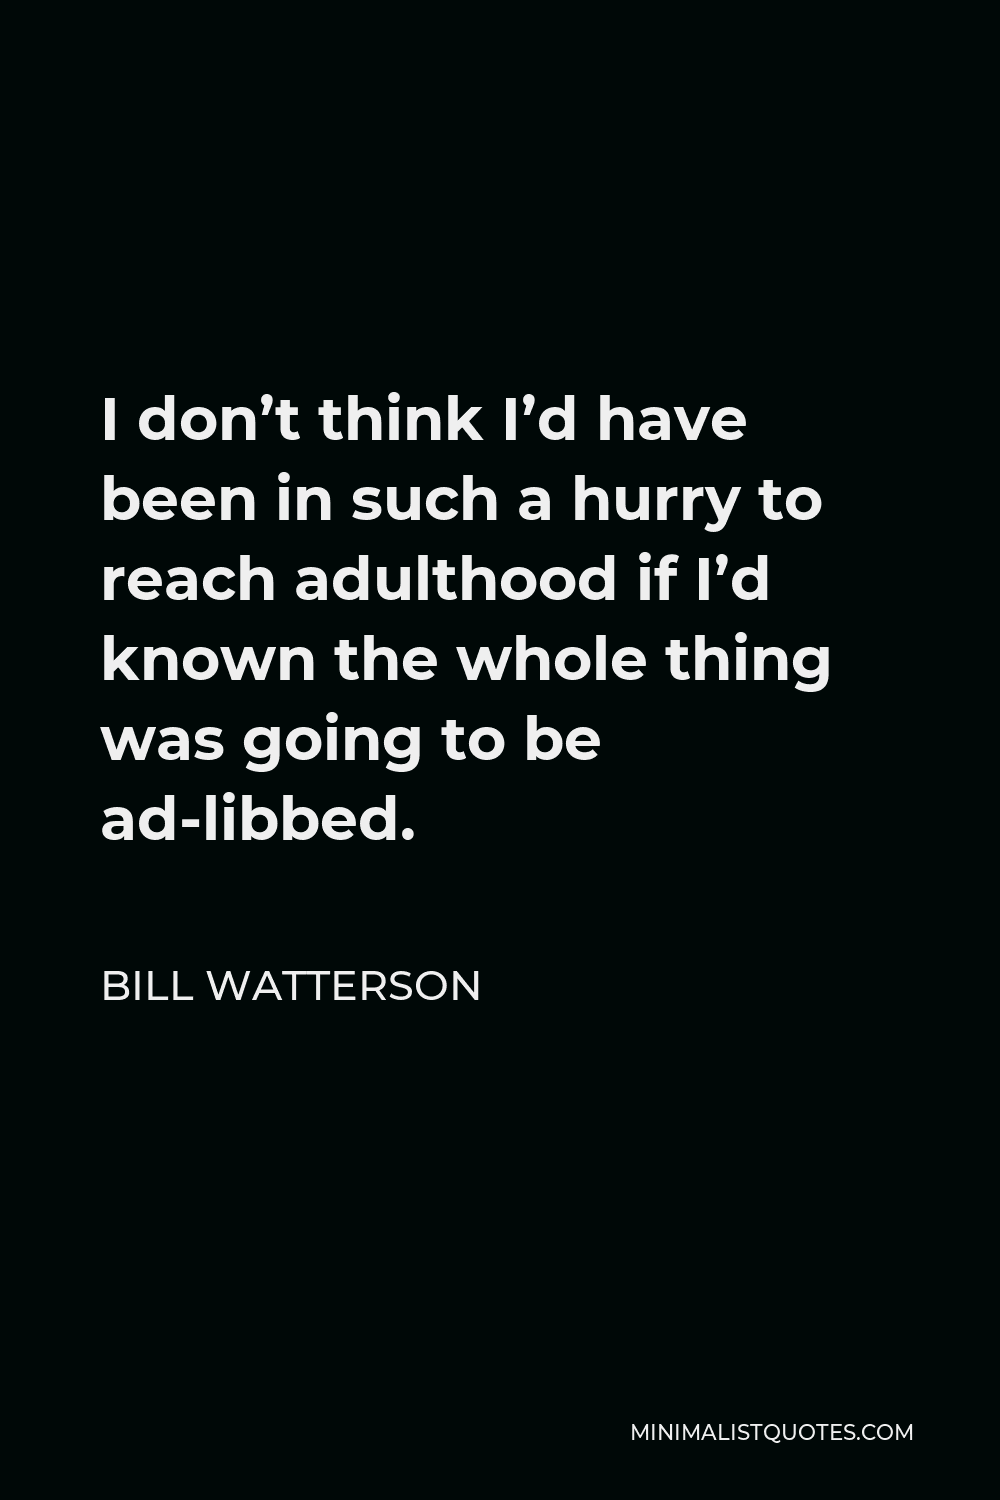 Bill Watterson Quote - I don’t think I’d have been in such a hurry to reach adulthood if I’d known the whole thing was going to be ad-libbed.